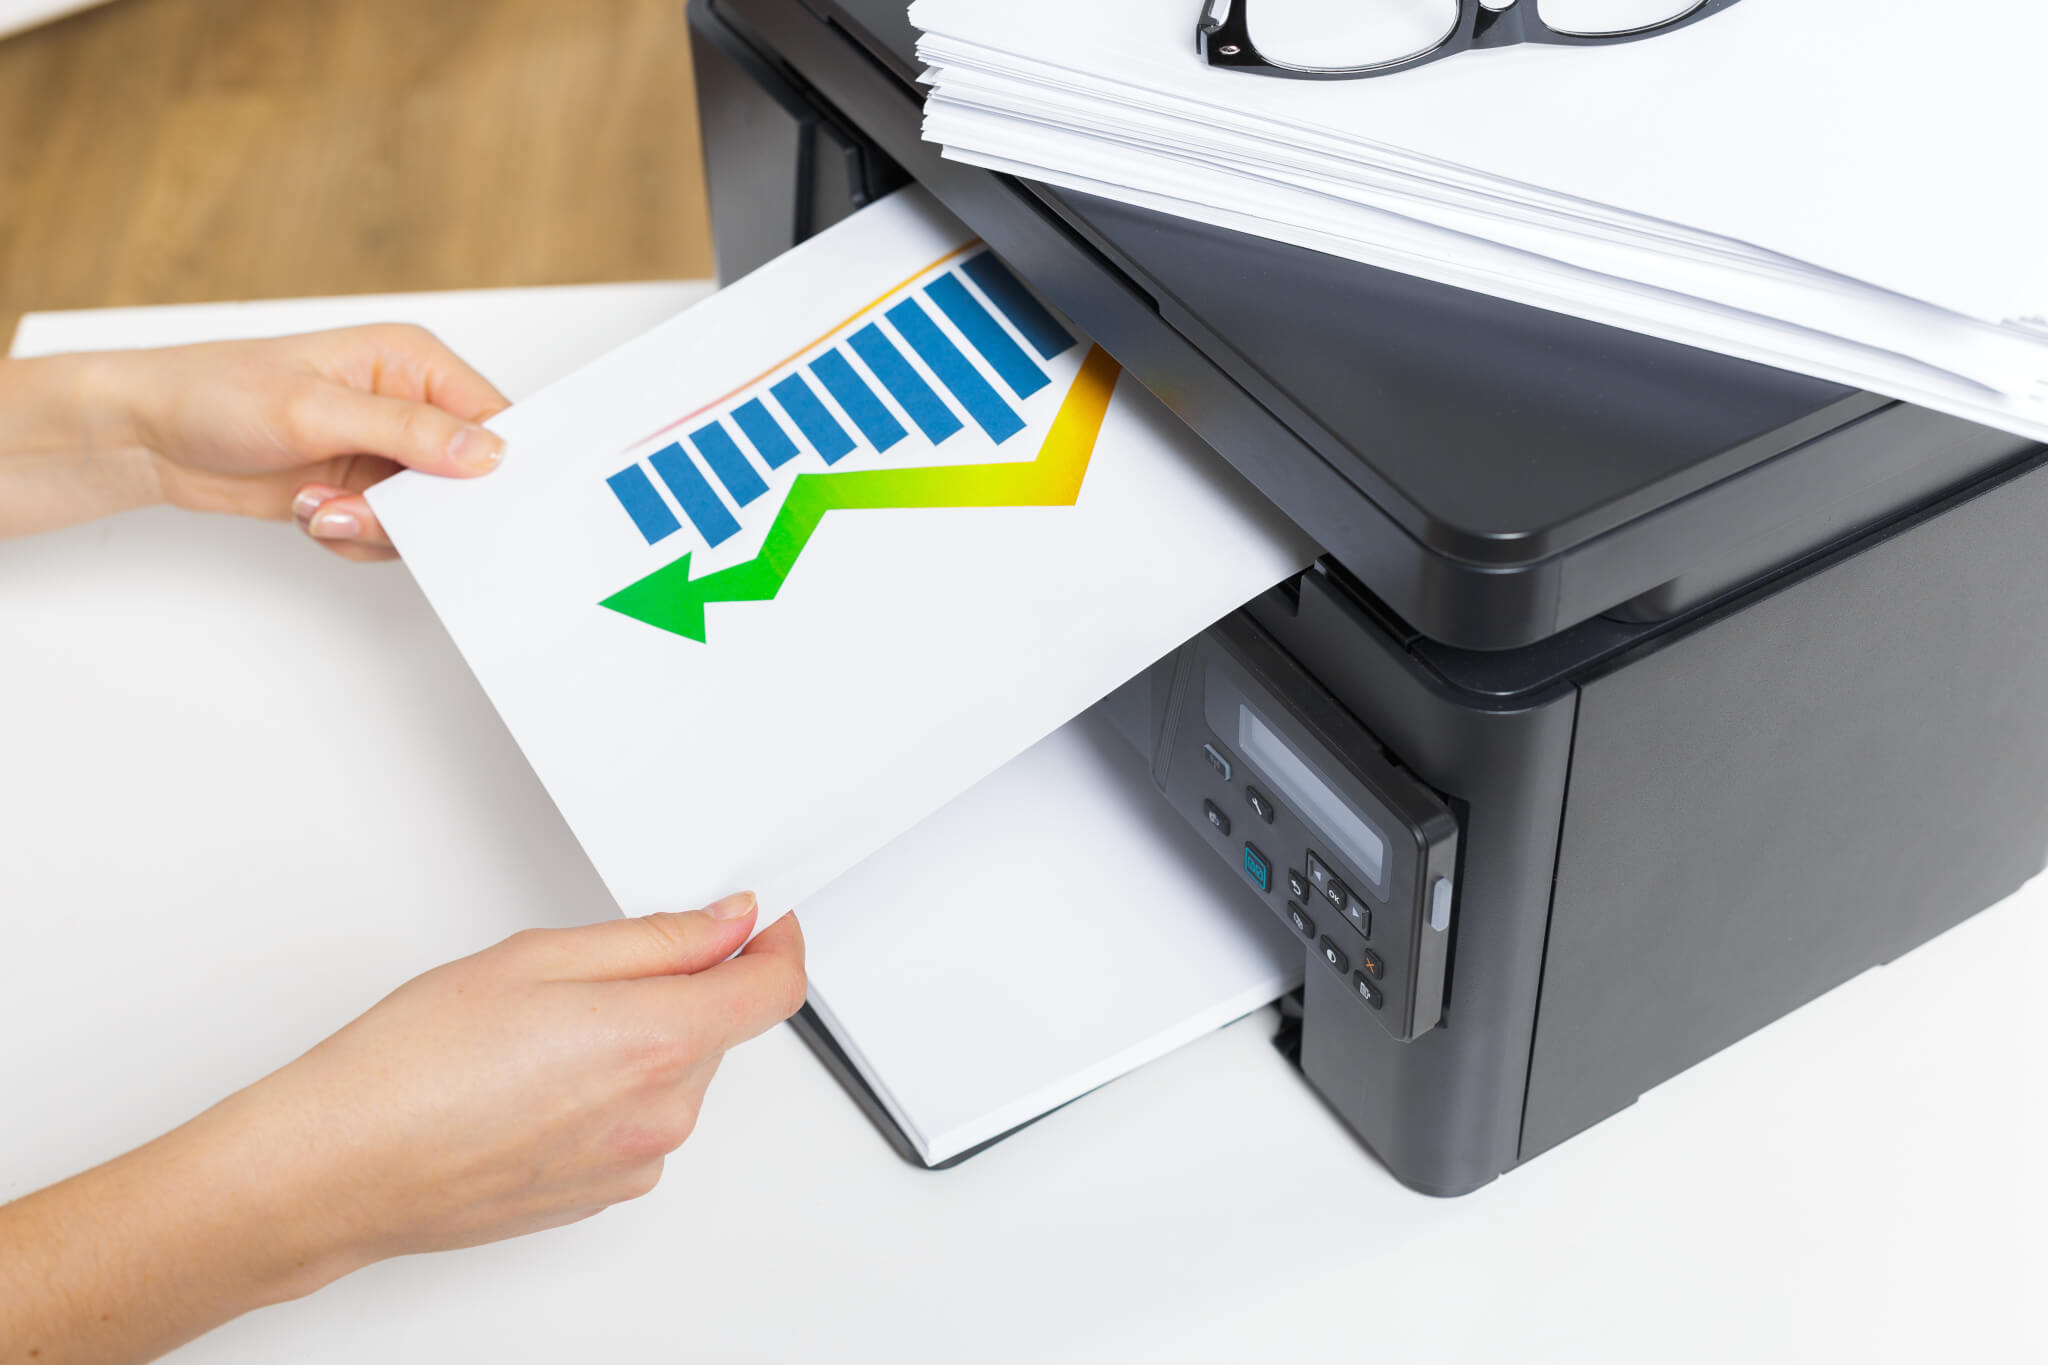 Your office laser printer pose a serious threat to your health, study warns - Study